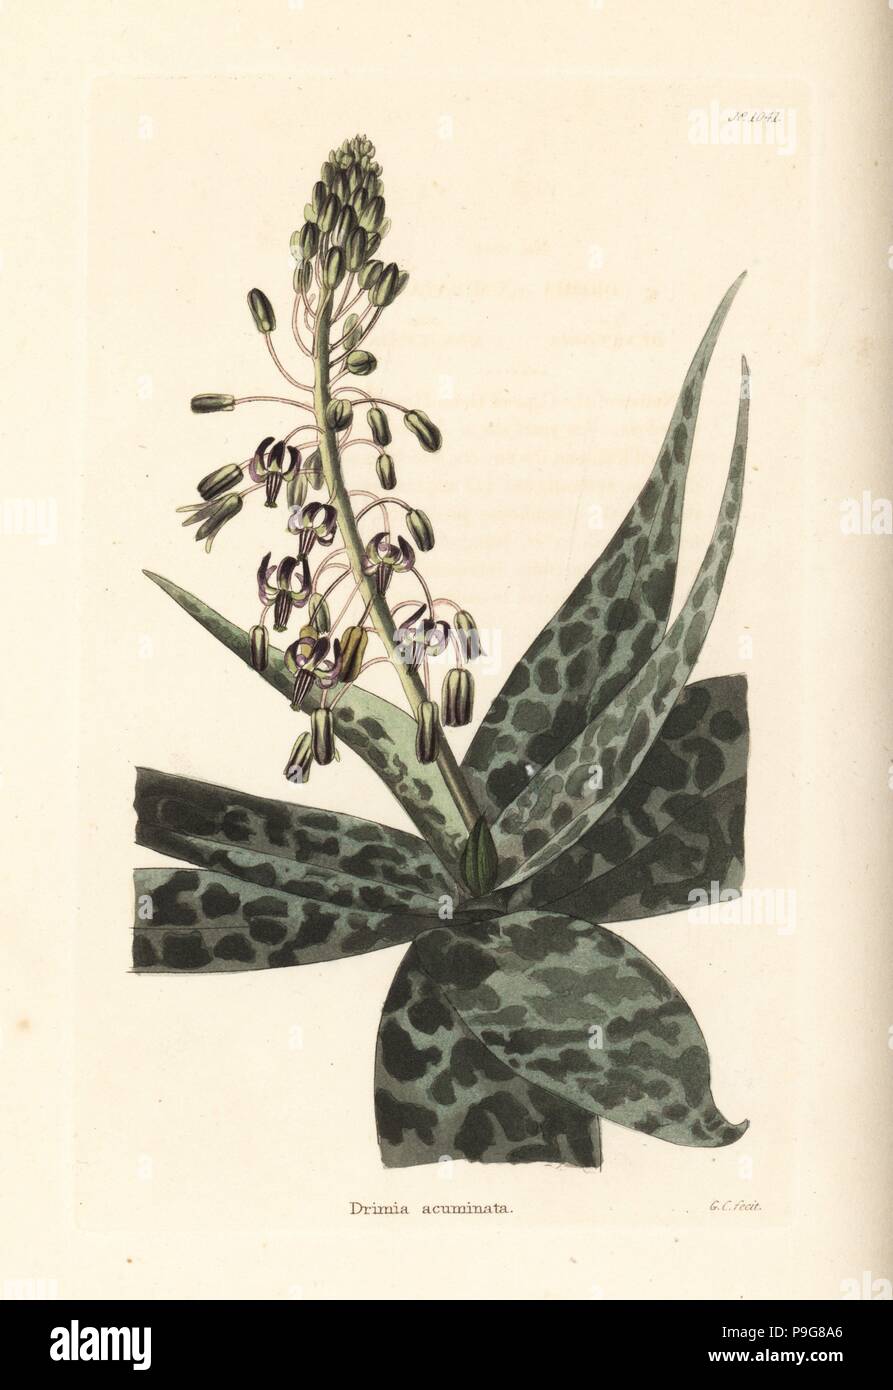 South Indian squill, Ledebouria revoluta (Drimia acuminata). Handcoloured copperplate engraving by George Cooke from Conrad Loddiges' Botanical Cabinet, Hackney, 1825. Stock Photo